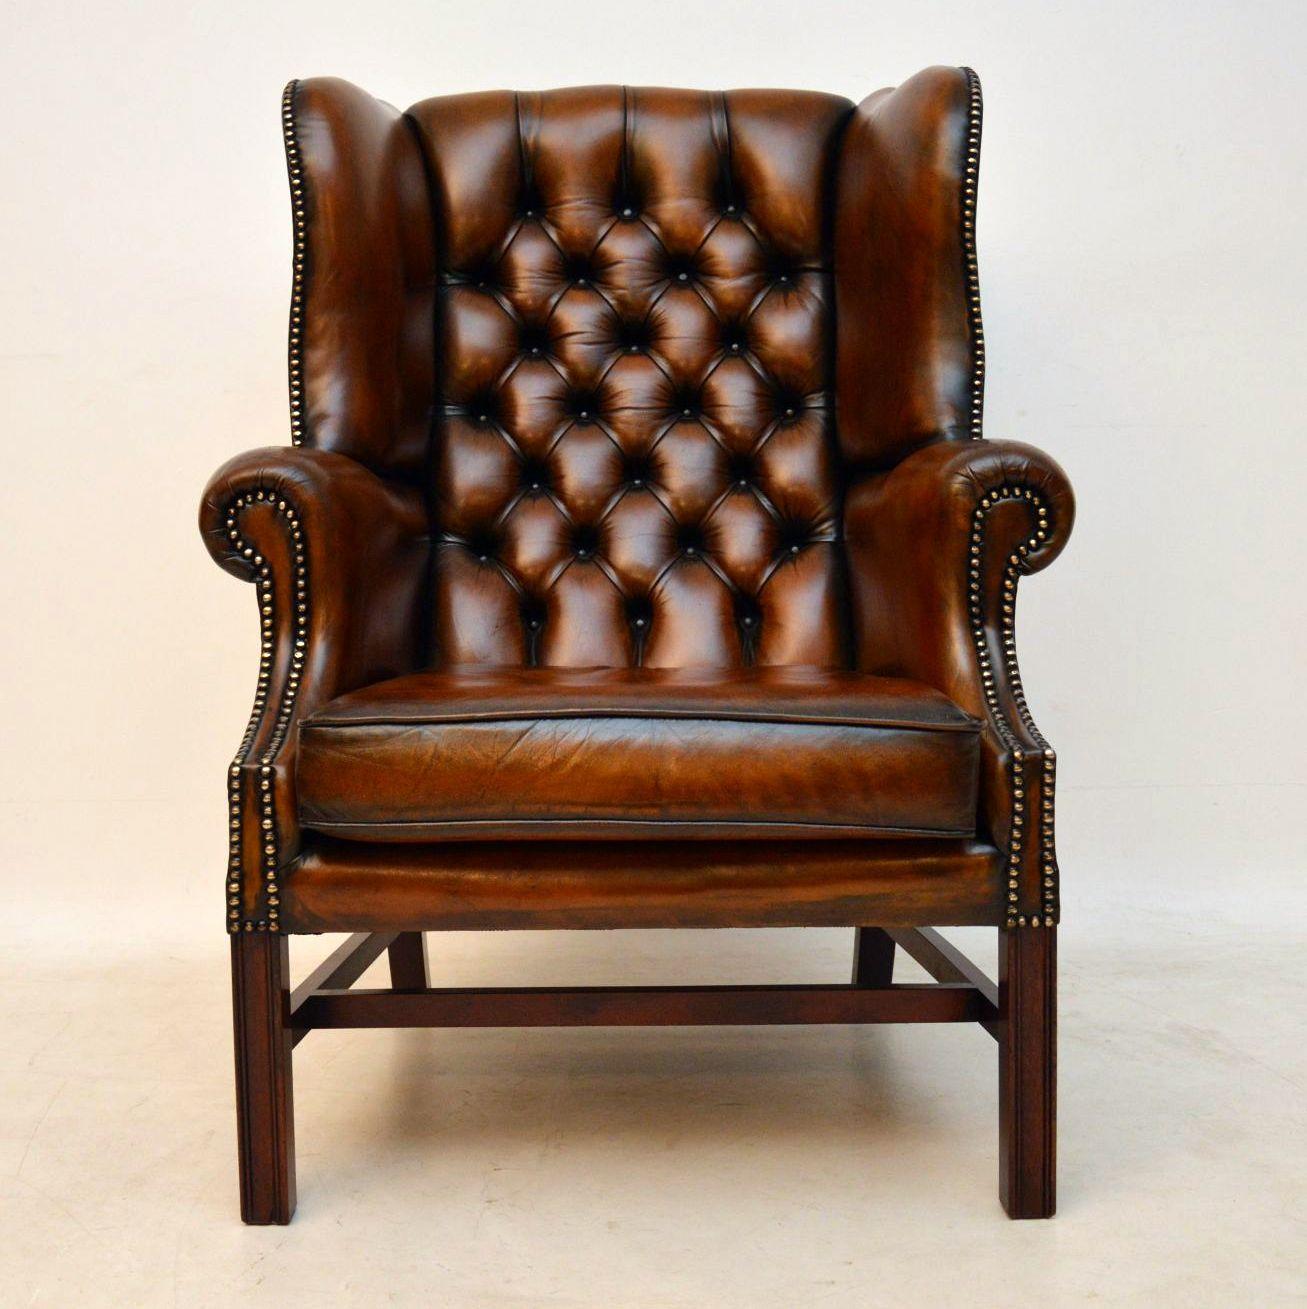 Large antique Chippendale style leather wing armchair in good original condition & very comfortable too. The leather is naturally distressed & has lots of character. It has a deep buttoned back, generous wings, hand tacking & a loose cushion. The